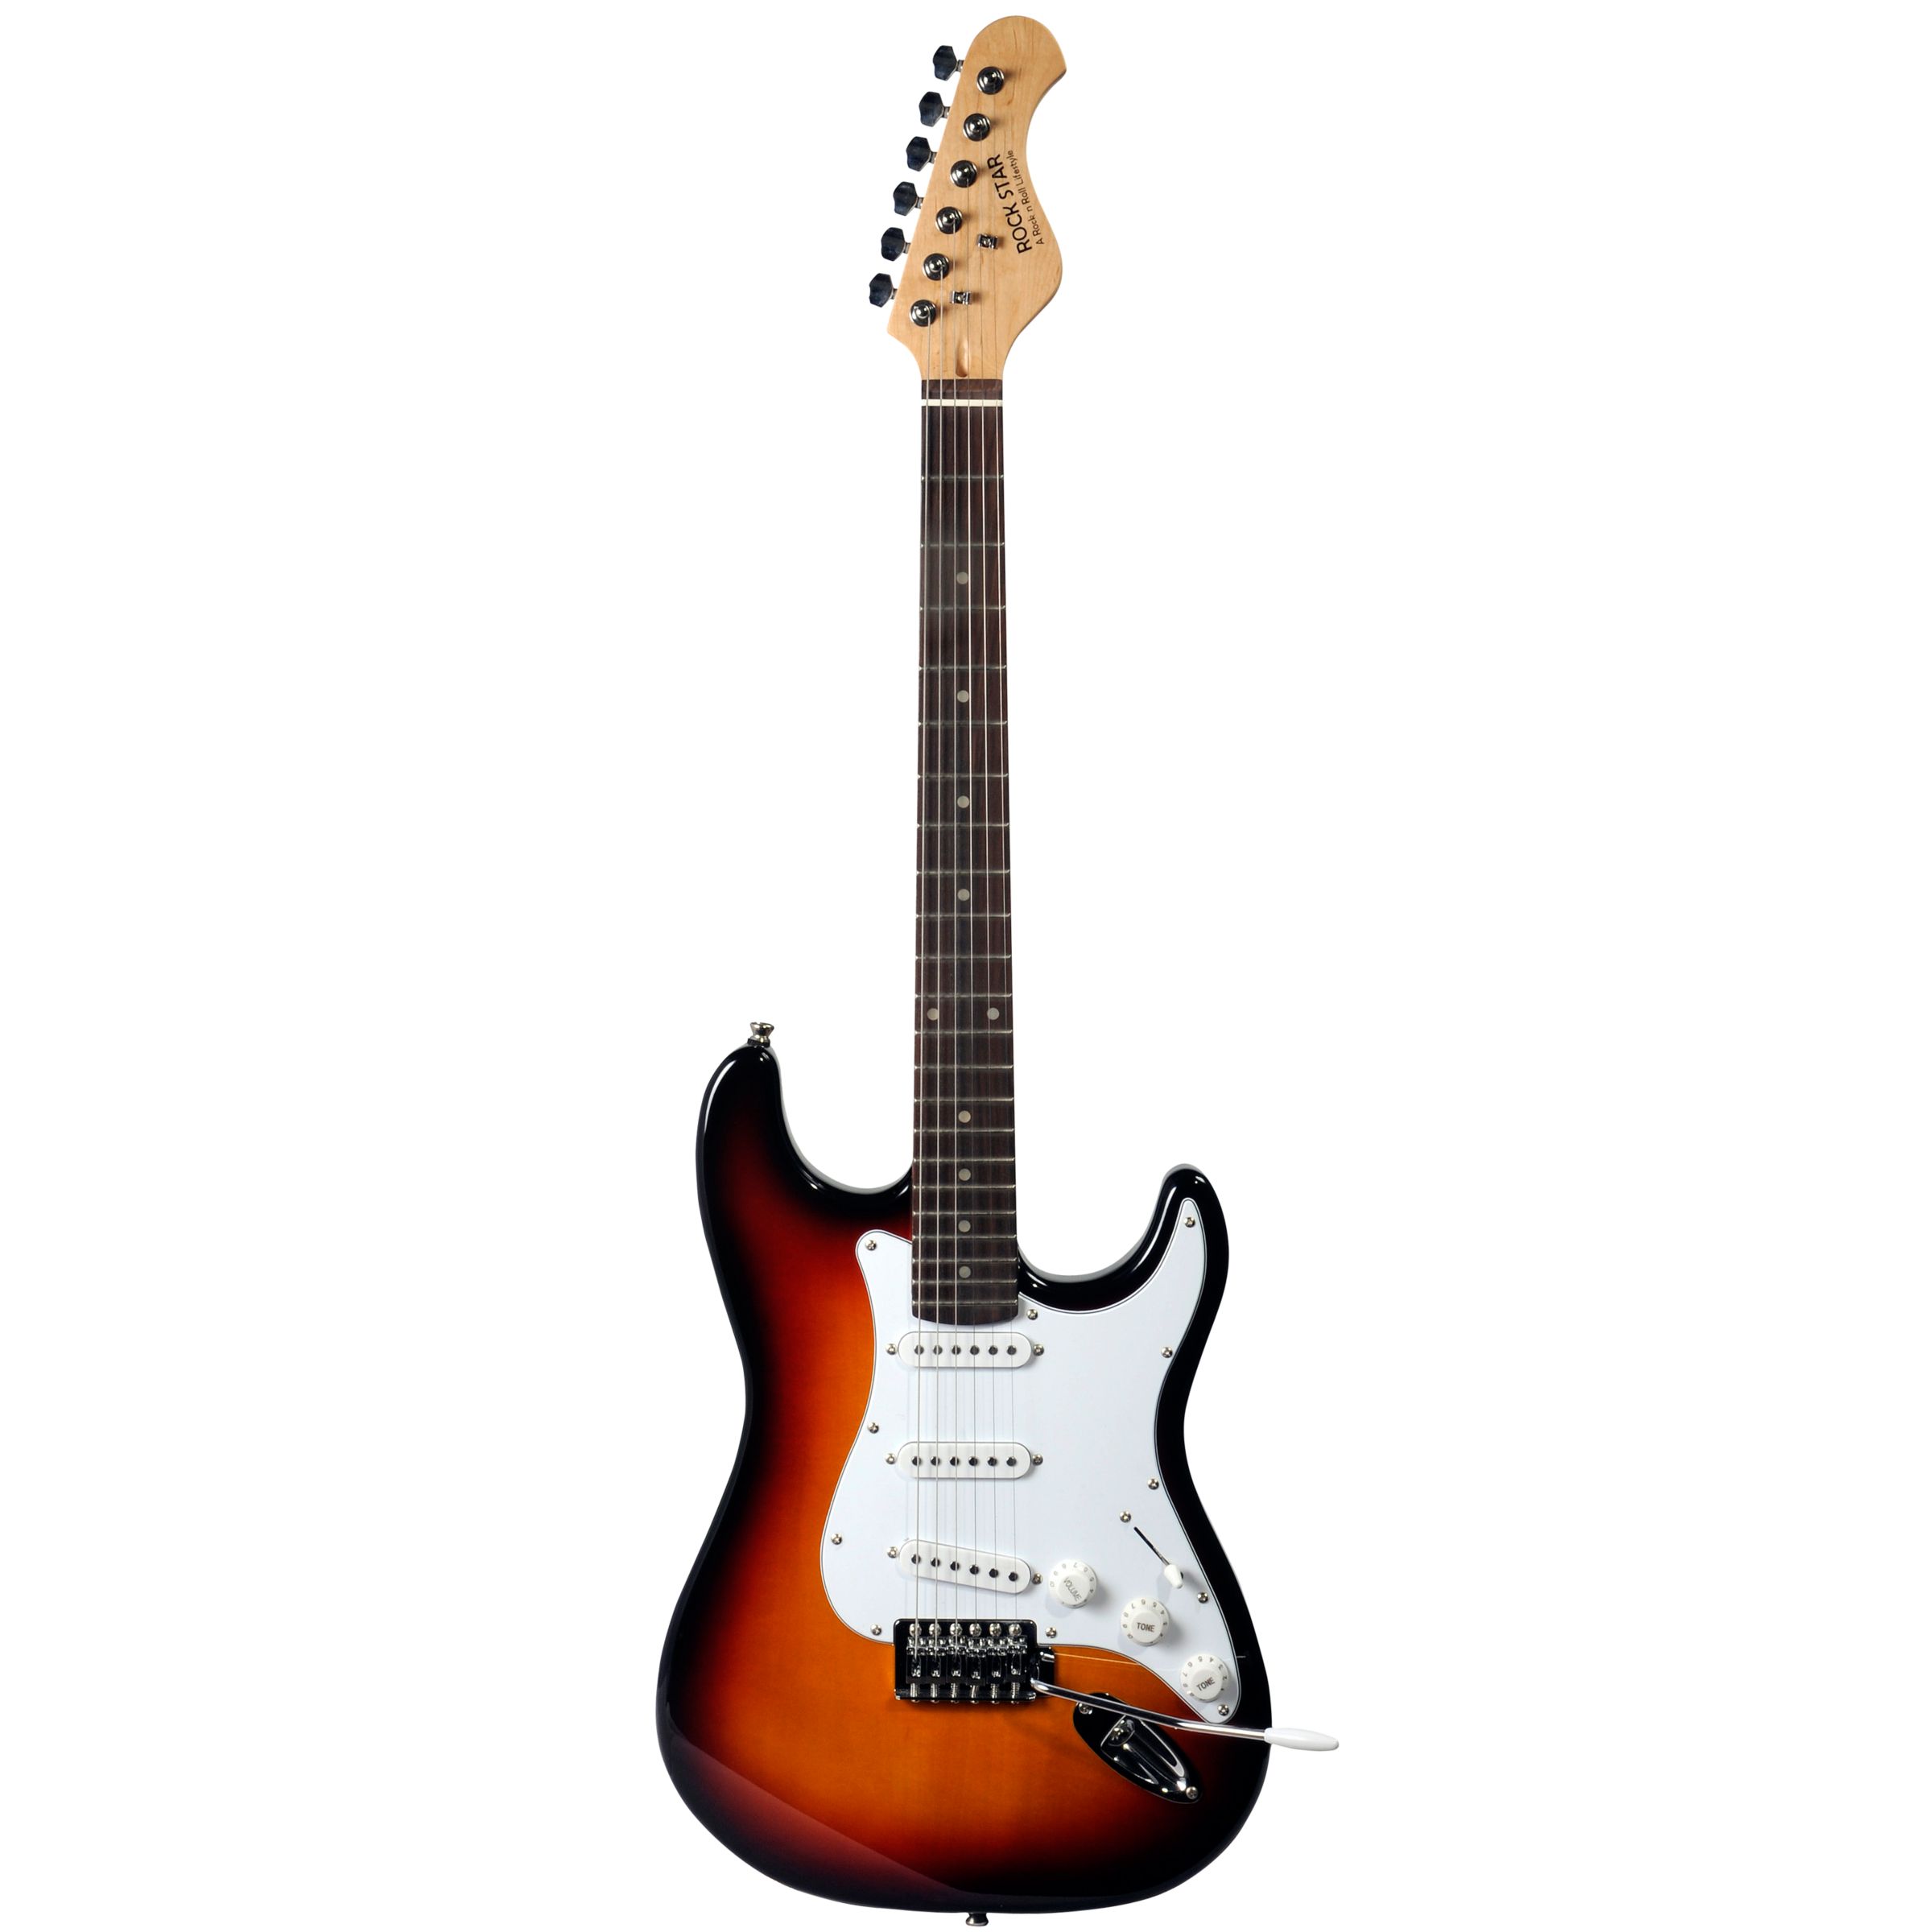 Rock Star Academy Strat Style Electric Guitar Package with Amplifier, Sunburst at John Lewis